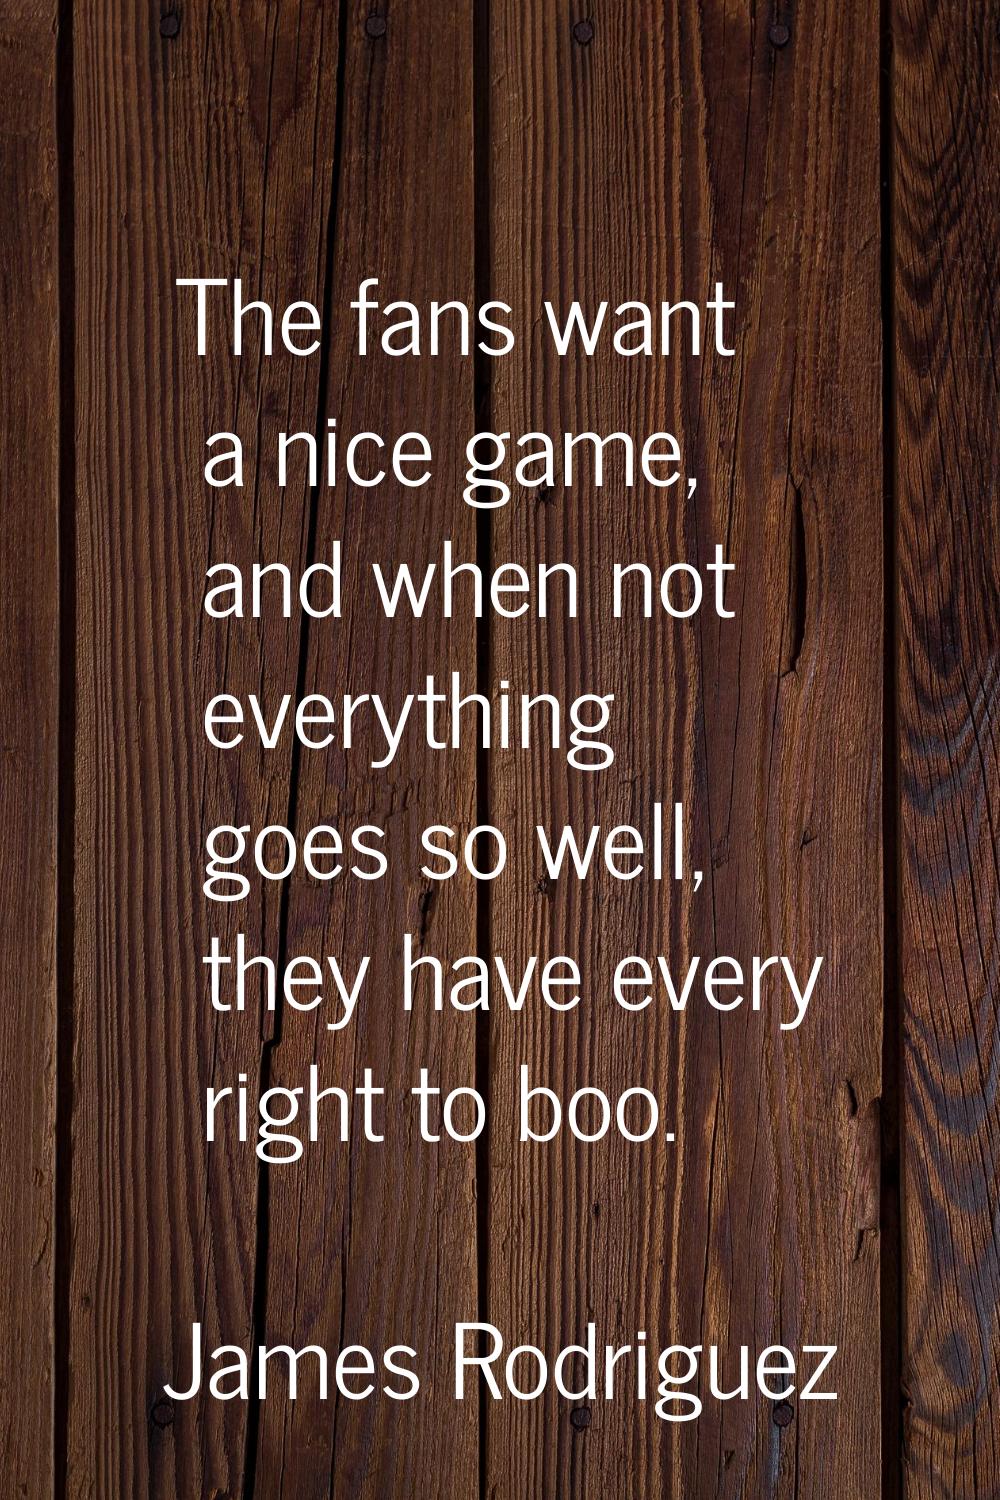 The fans want a nice game, and when not everything goes so well, they have every right to boo.